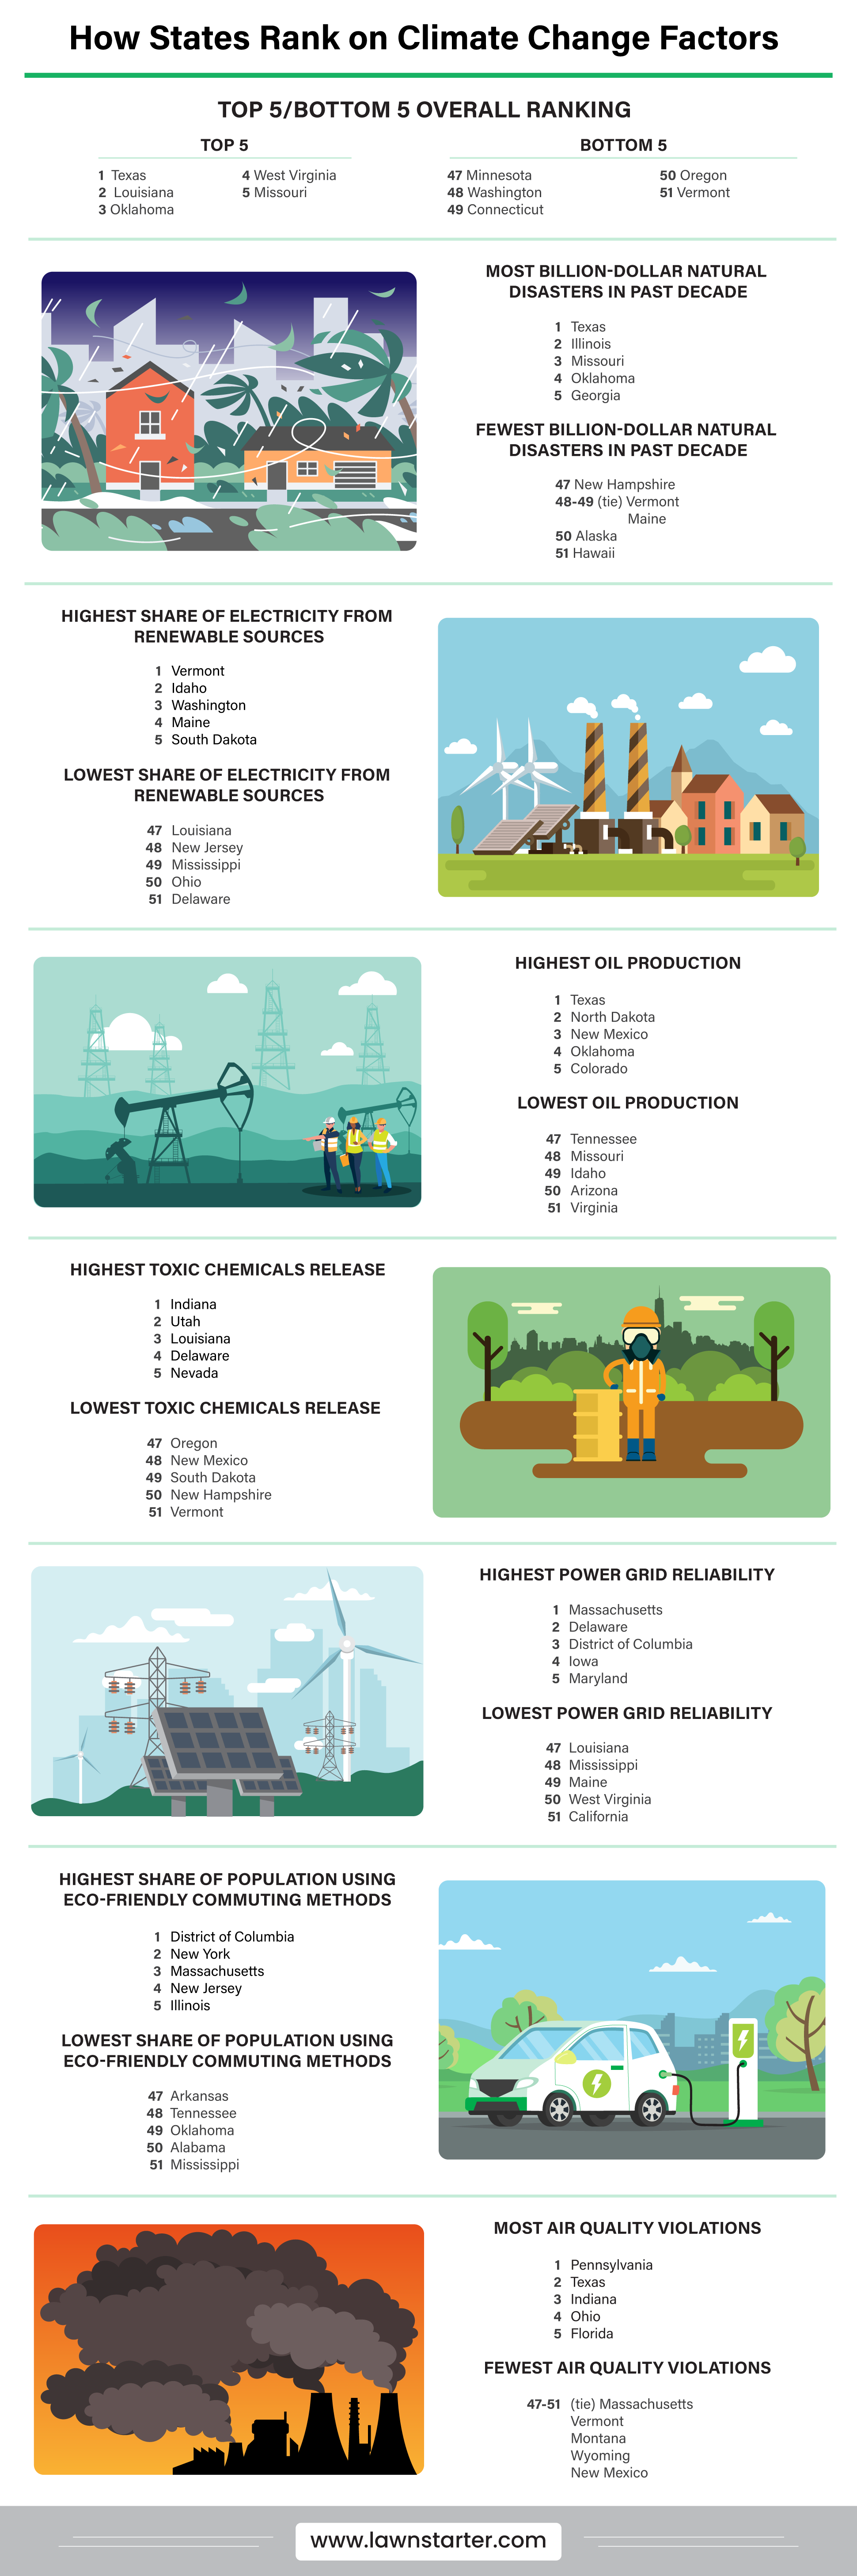 Infographic showing how states rank on climate factors such as eco-friendly commuting methods, percentage of power from renewable energy sources, etc.